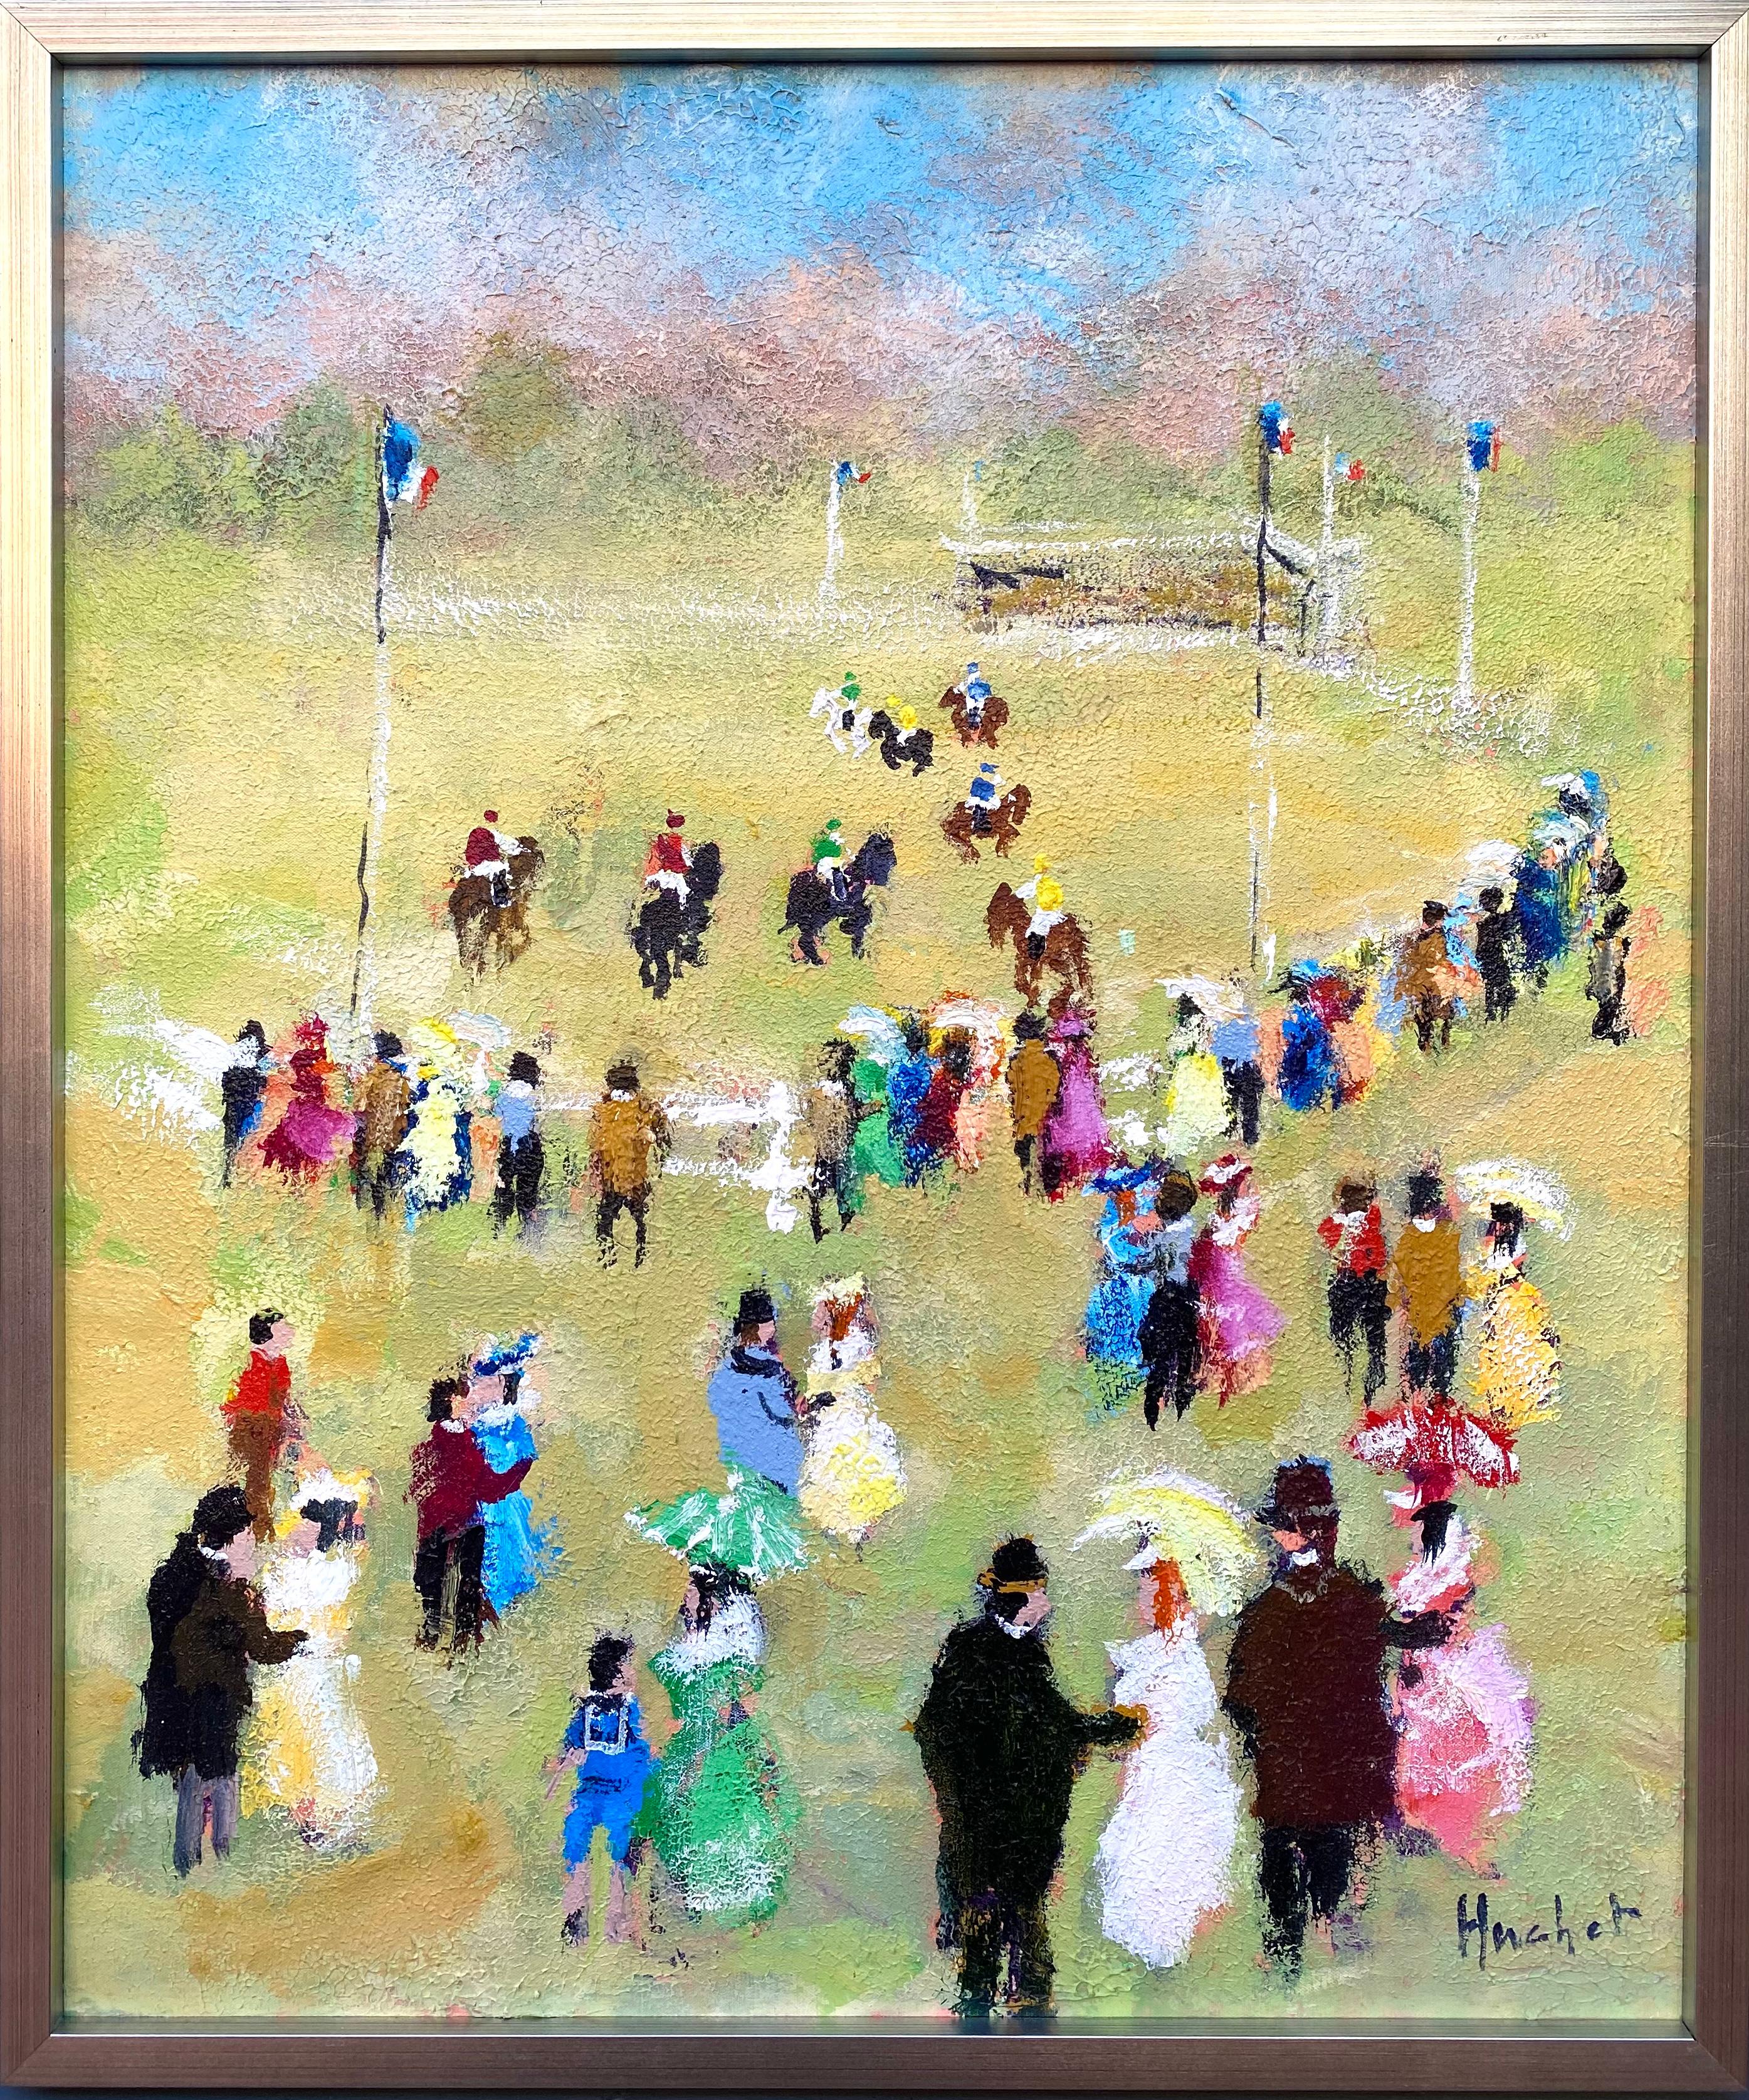 “The Polo Match” - Beige Figurative Painting by Urbain Huchet